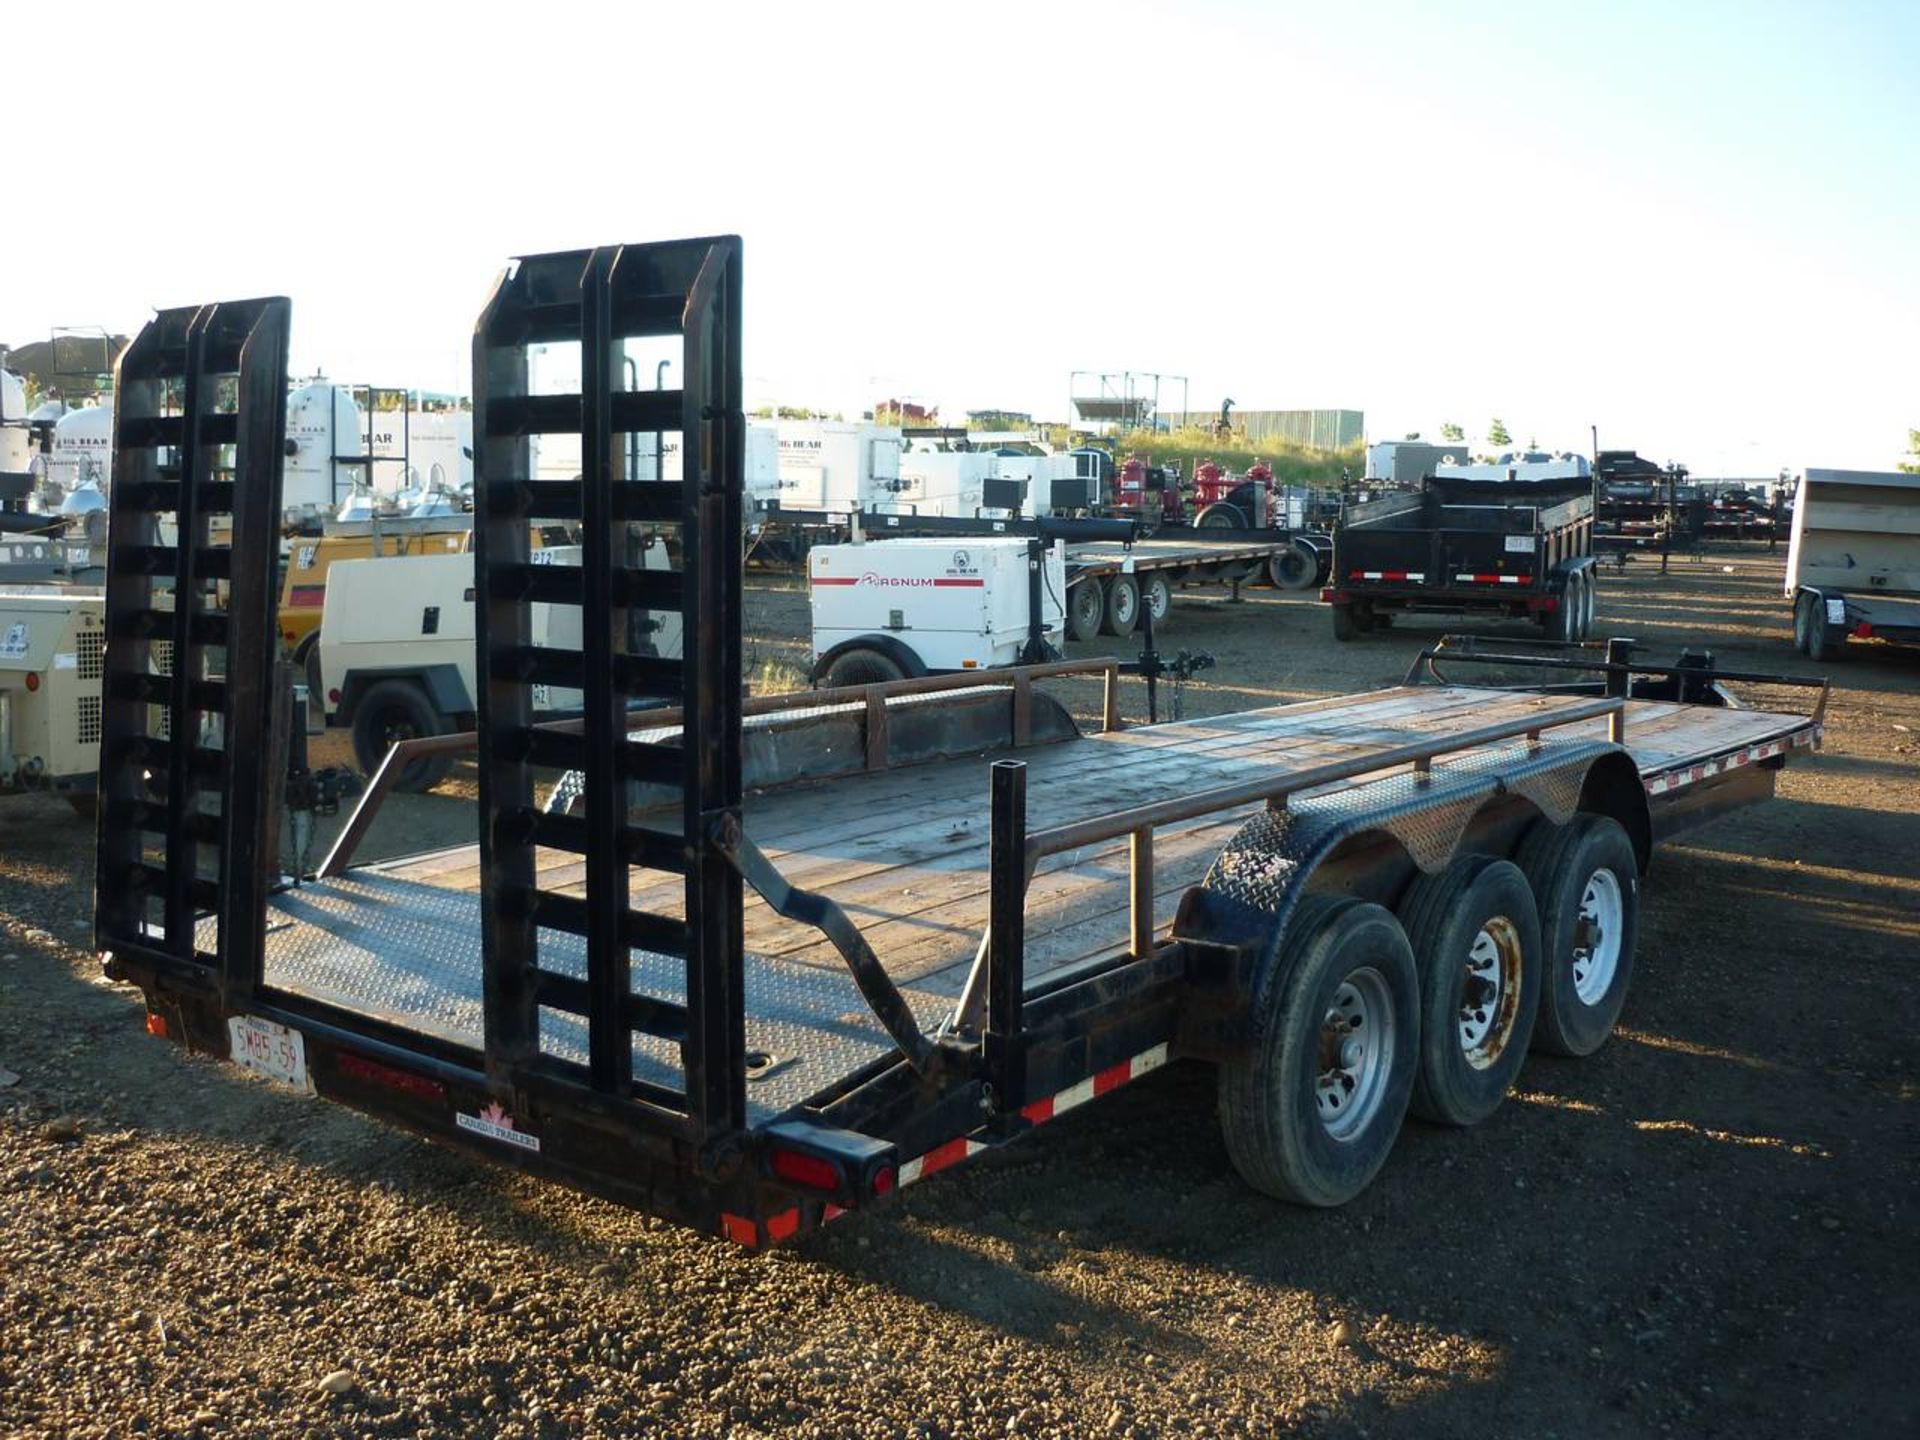 2017 Cantra Equipment trailer - Image 3 of 4